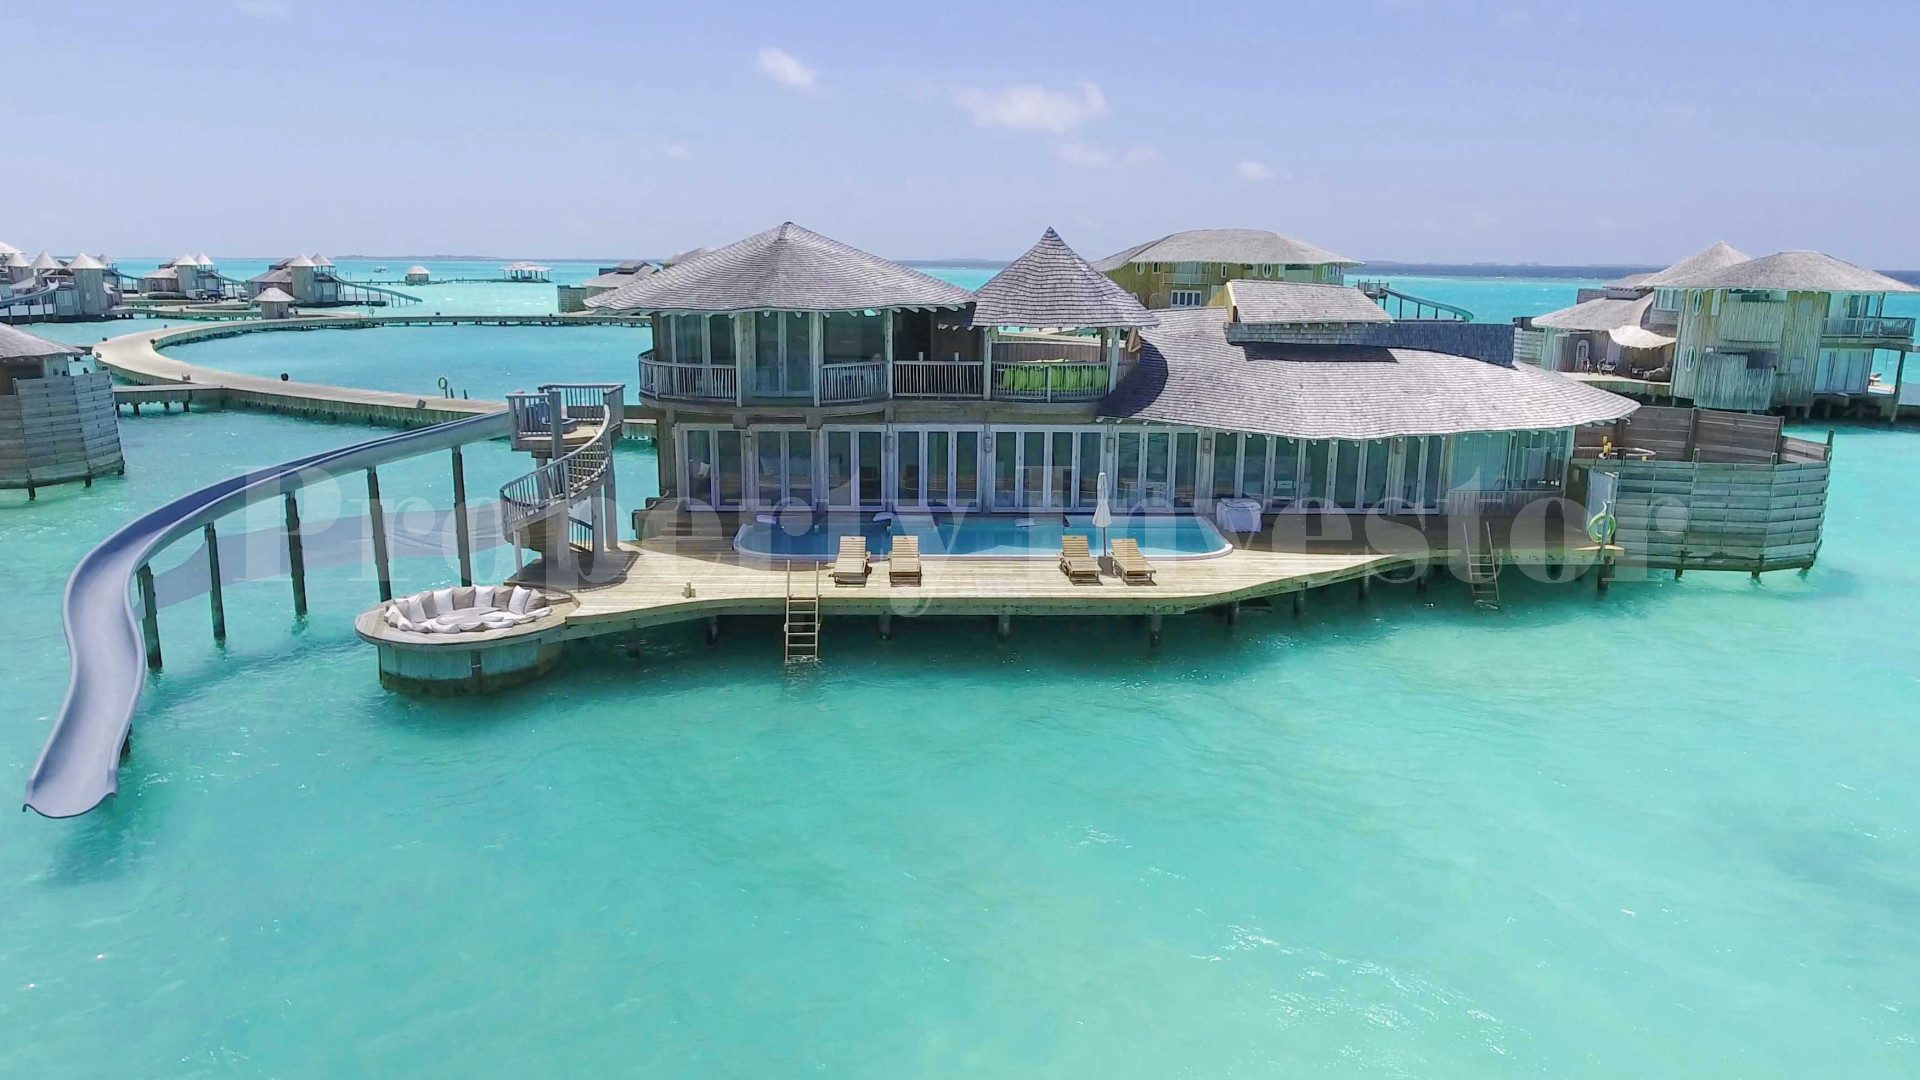 2 Bedroom Overwater Villa with Slide in the Maldives